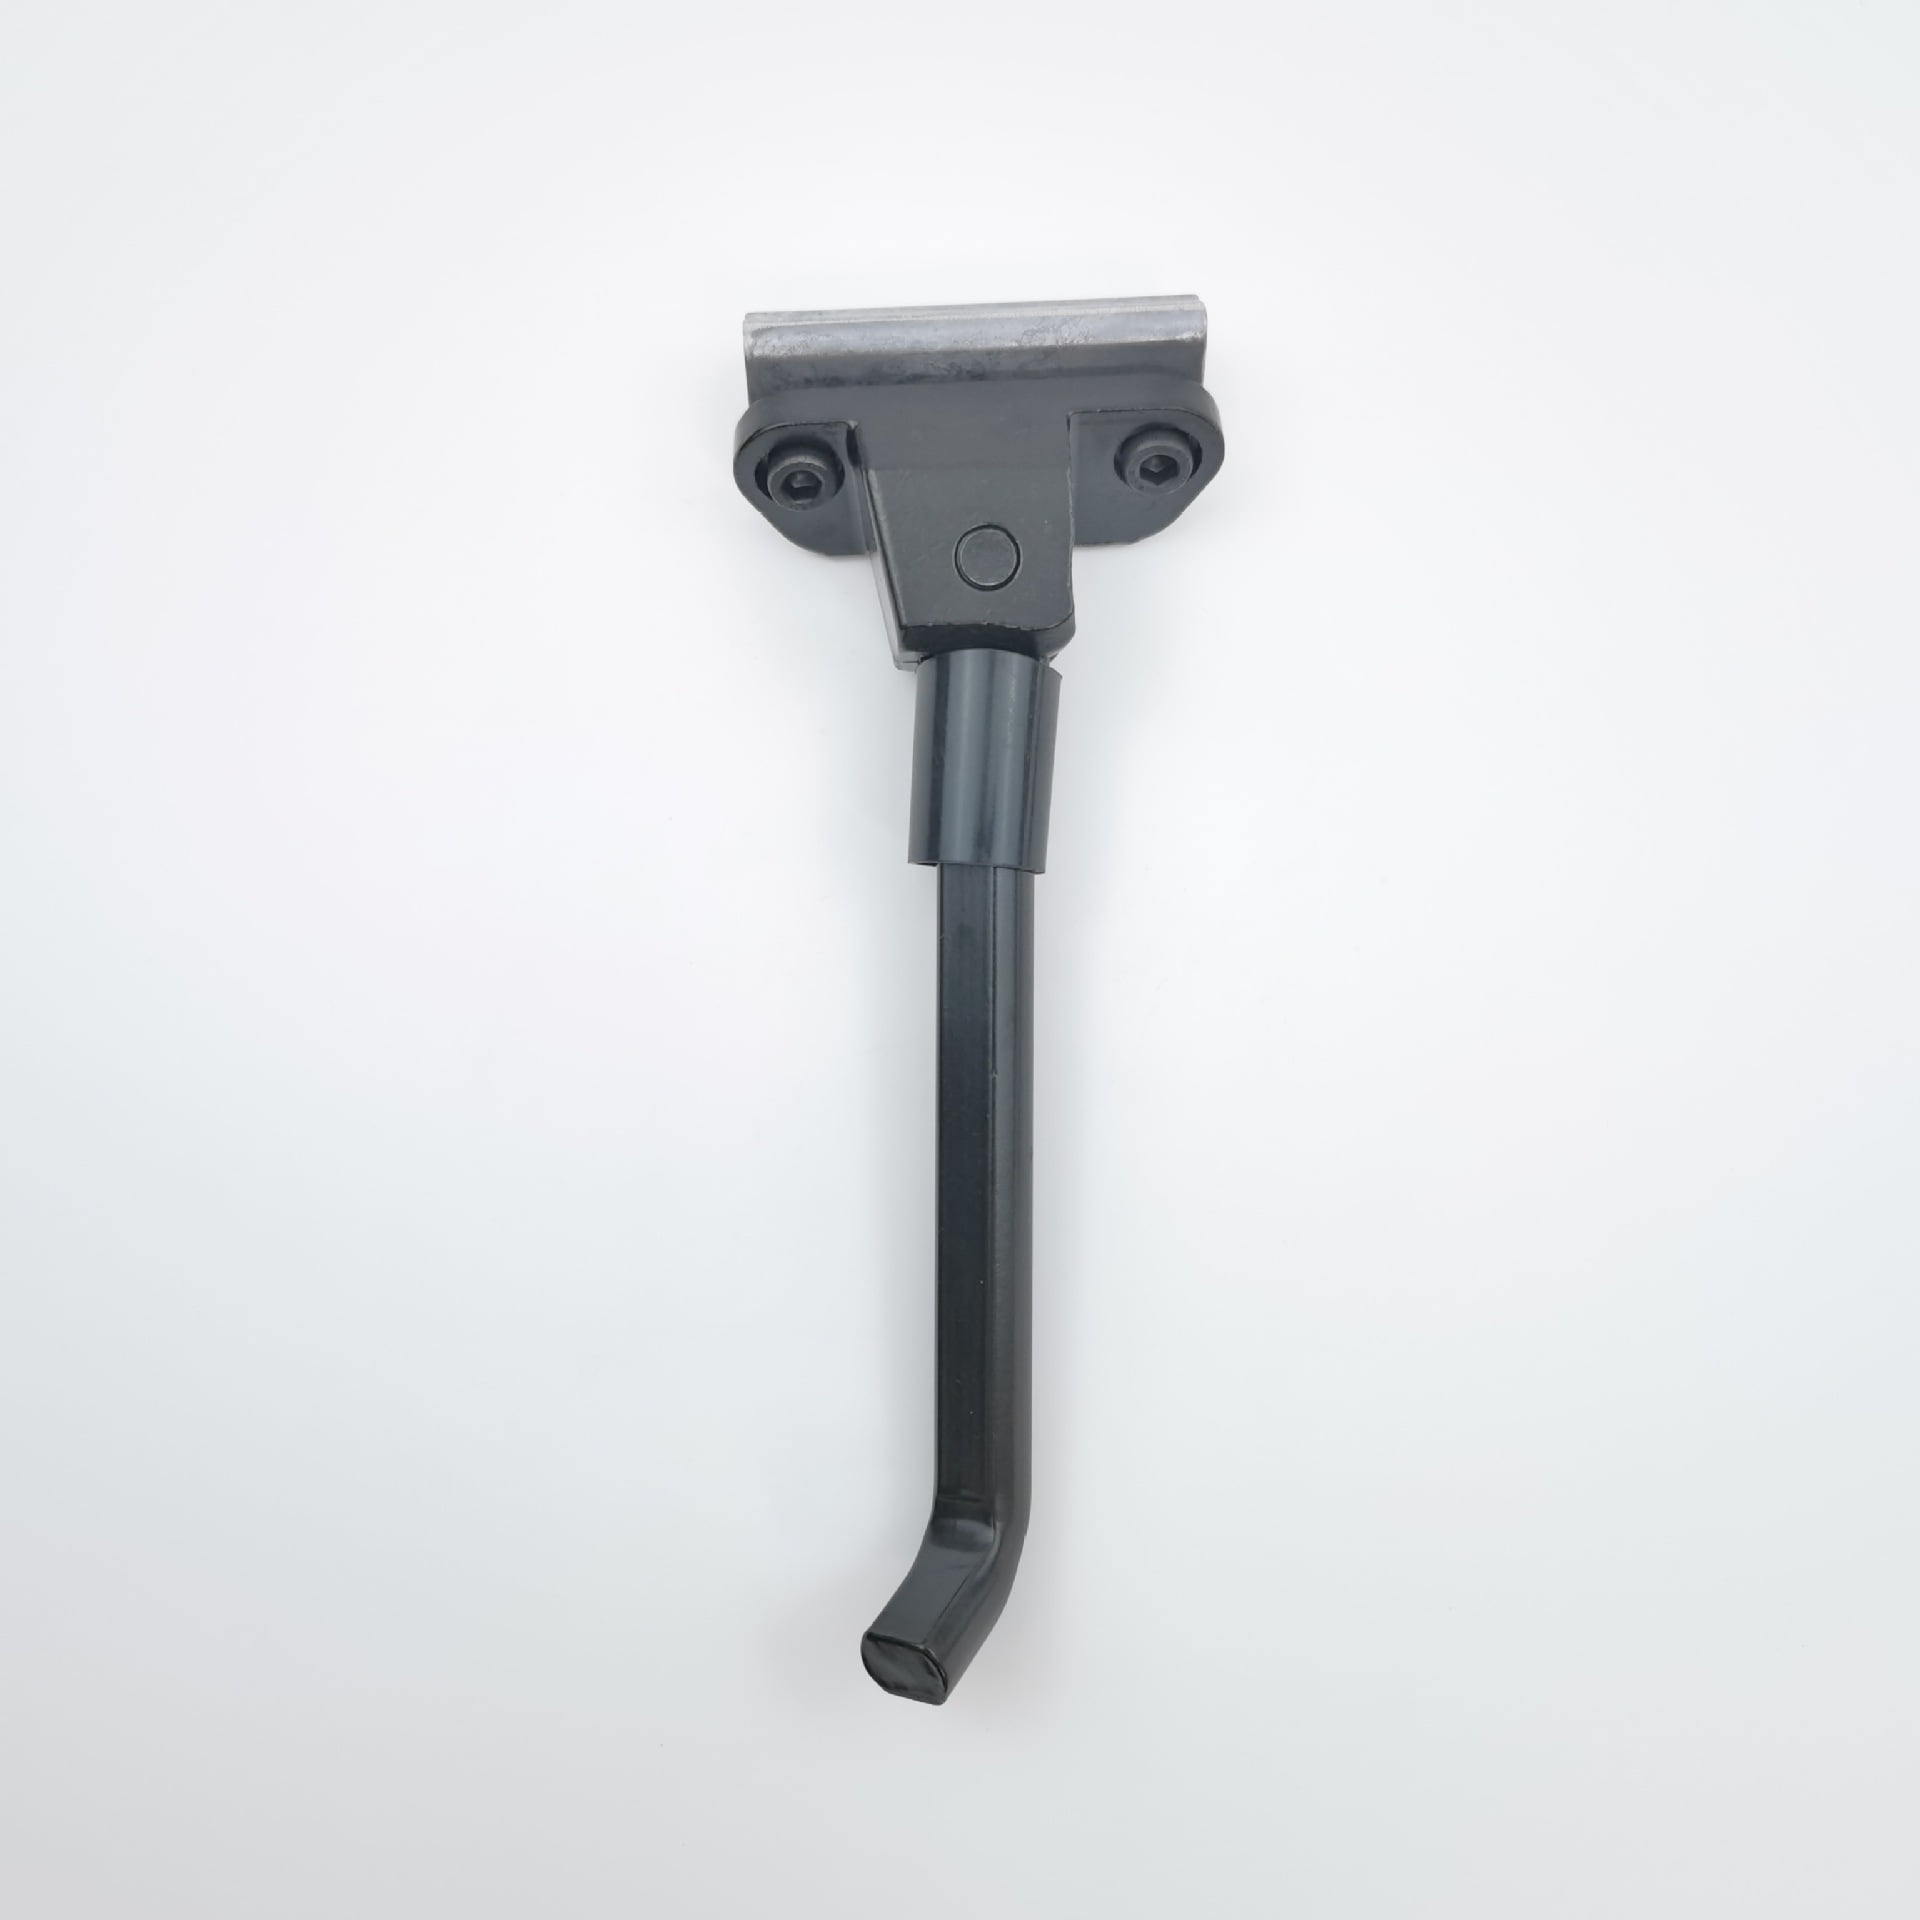 Extended Foot Support Kick-Stand Bracket for Ninebot MAX G30 Electric Scooter 